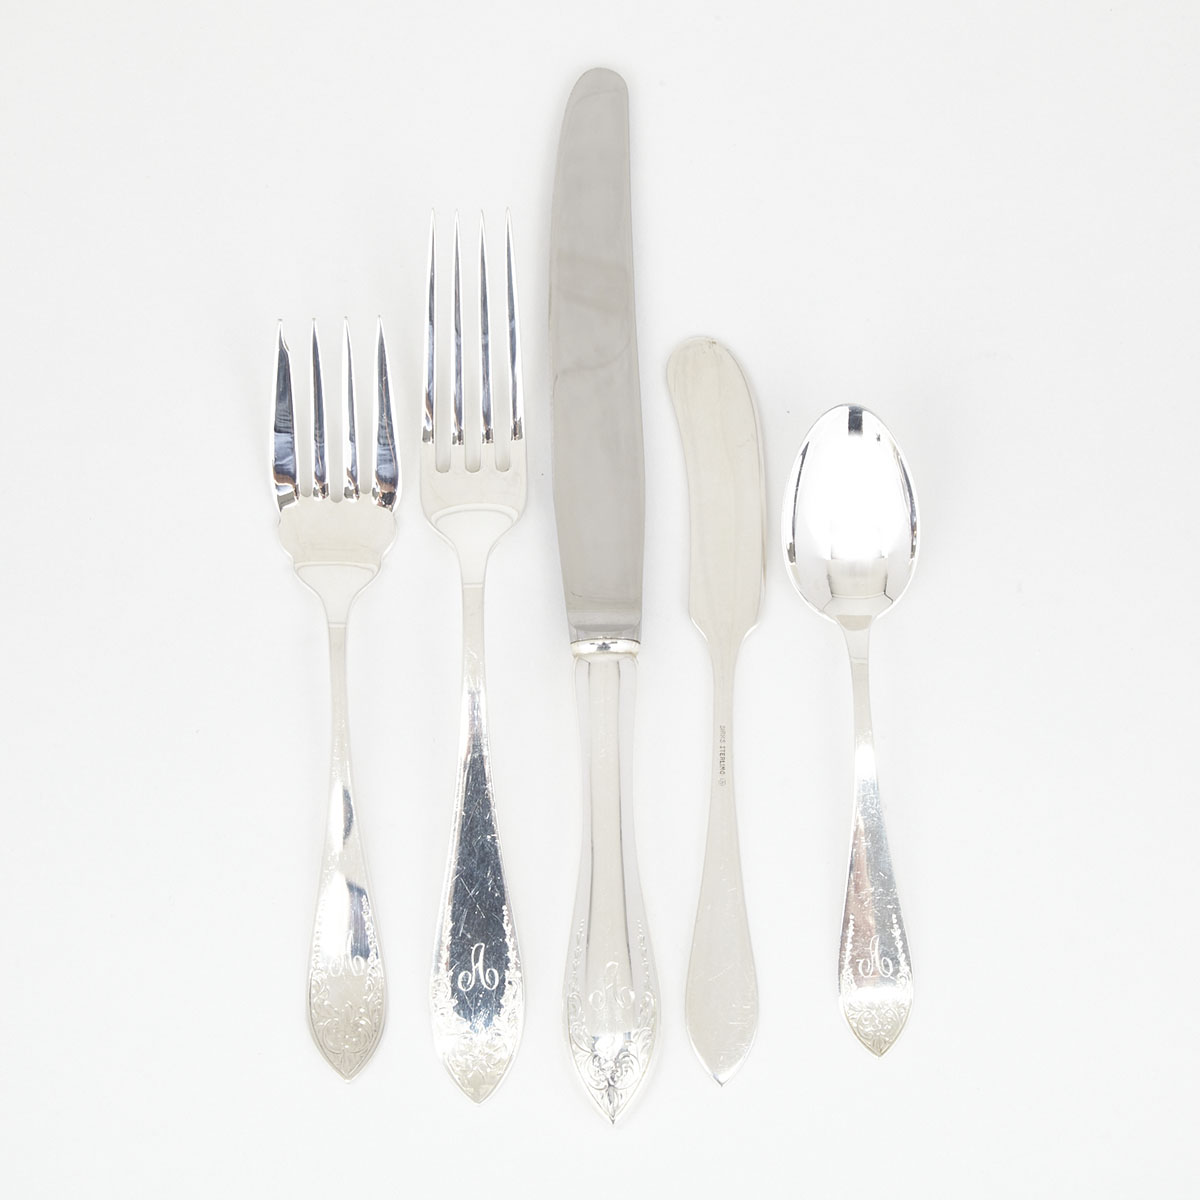 Canadian Silver ‘Tudor Royal’ Pattern Flatware Service, Henry Birks & Sons, Montreal, Que, 20th century